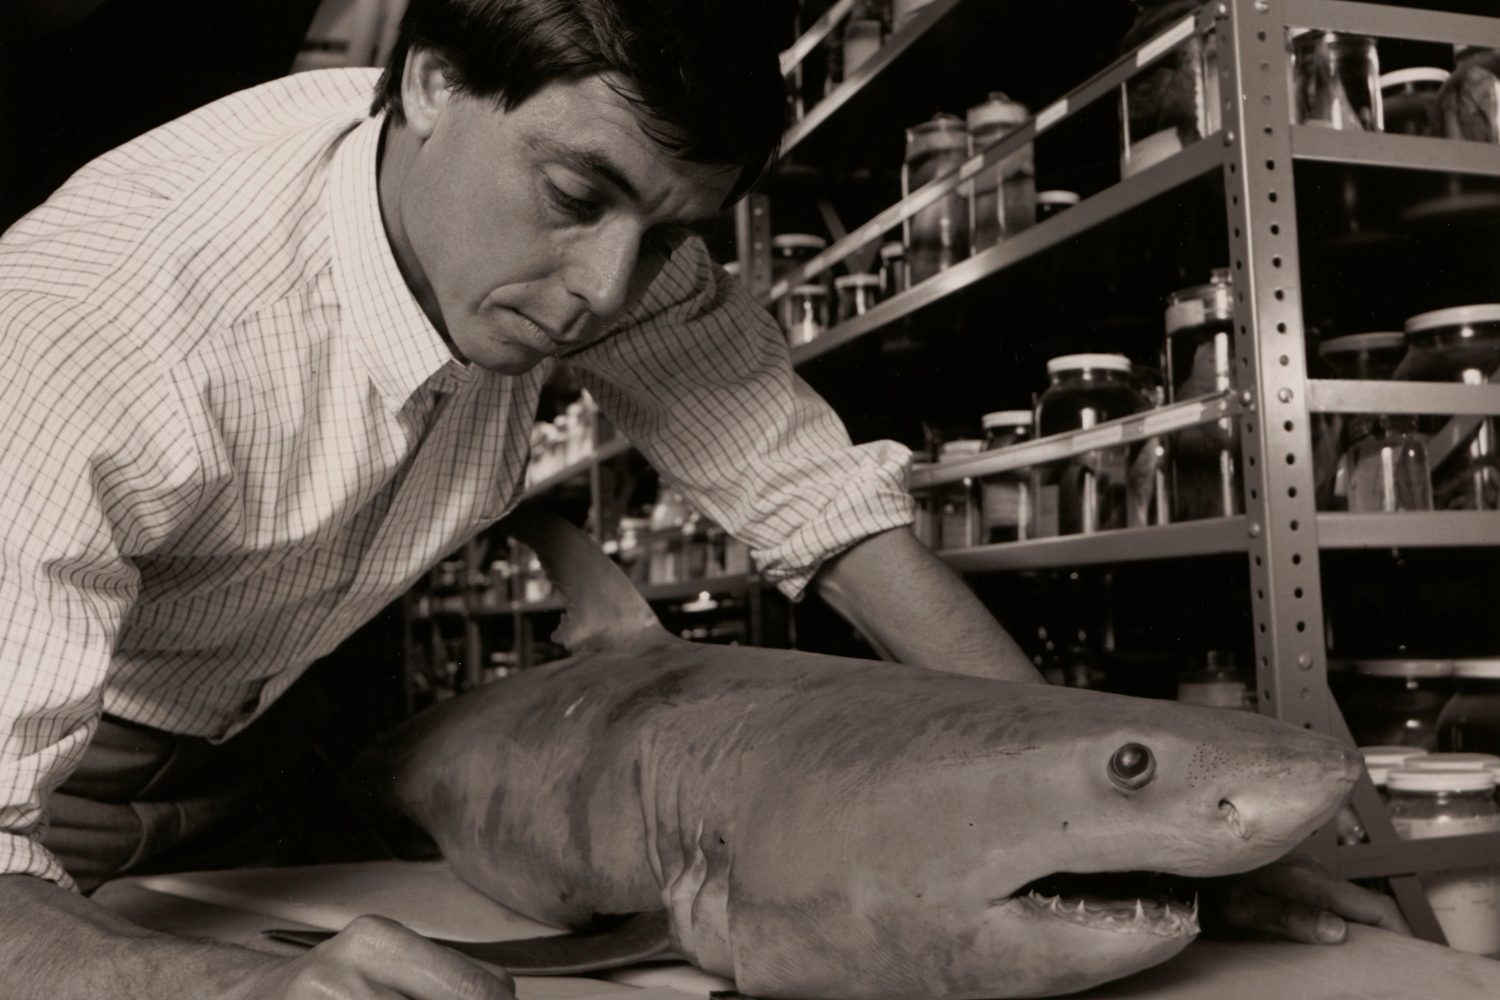 A marine biologist poses in his office with the HP 15C calculator.